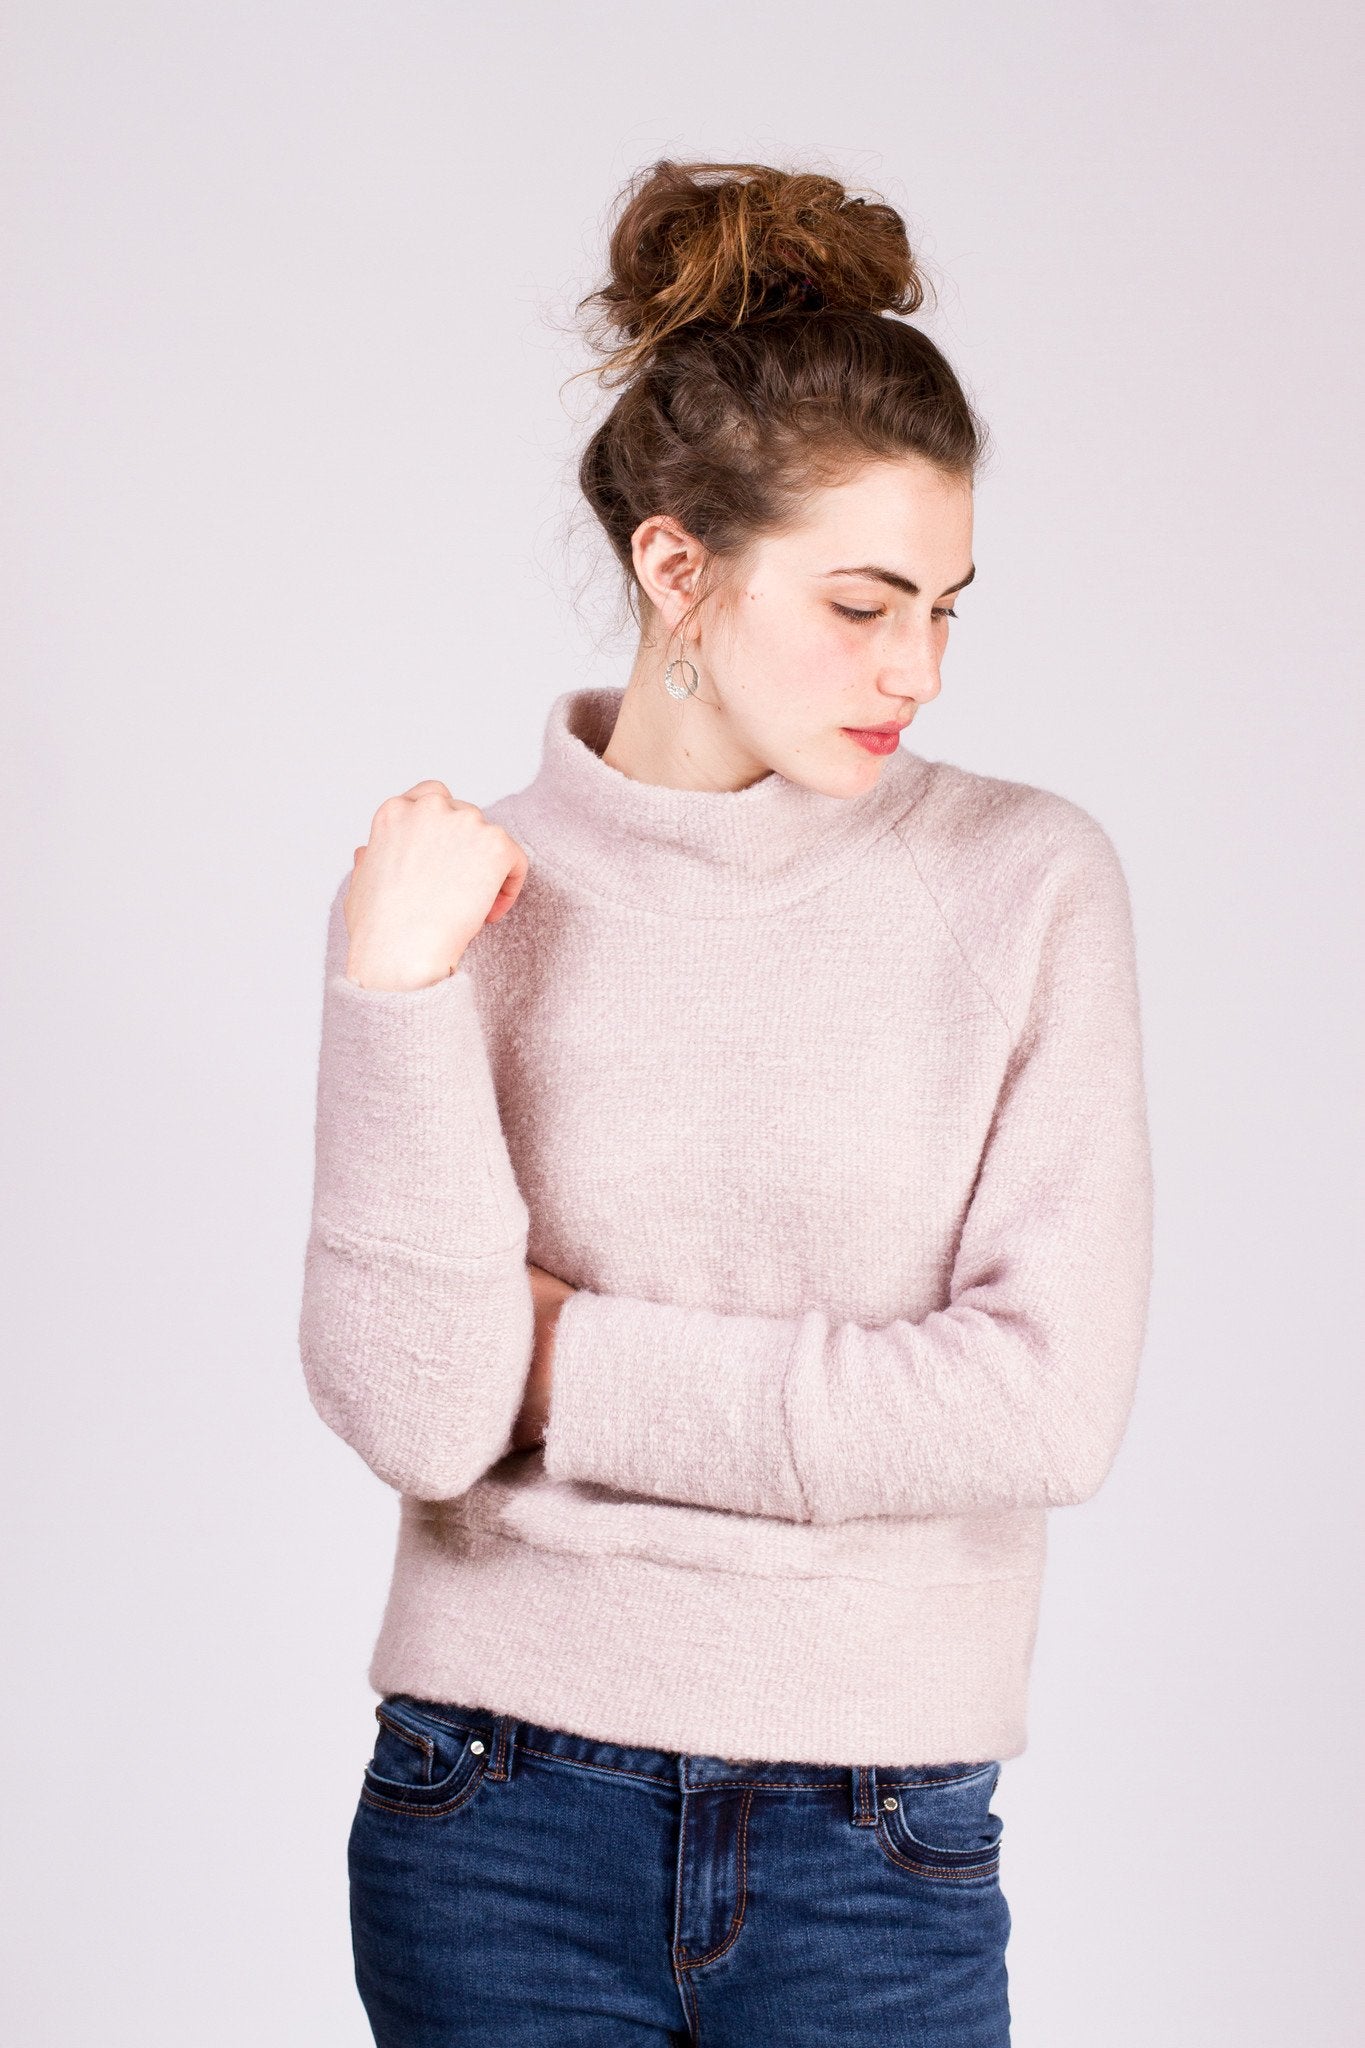 Sew House Seven - The Toaster Sweaters Sewing Pattern